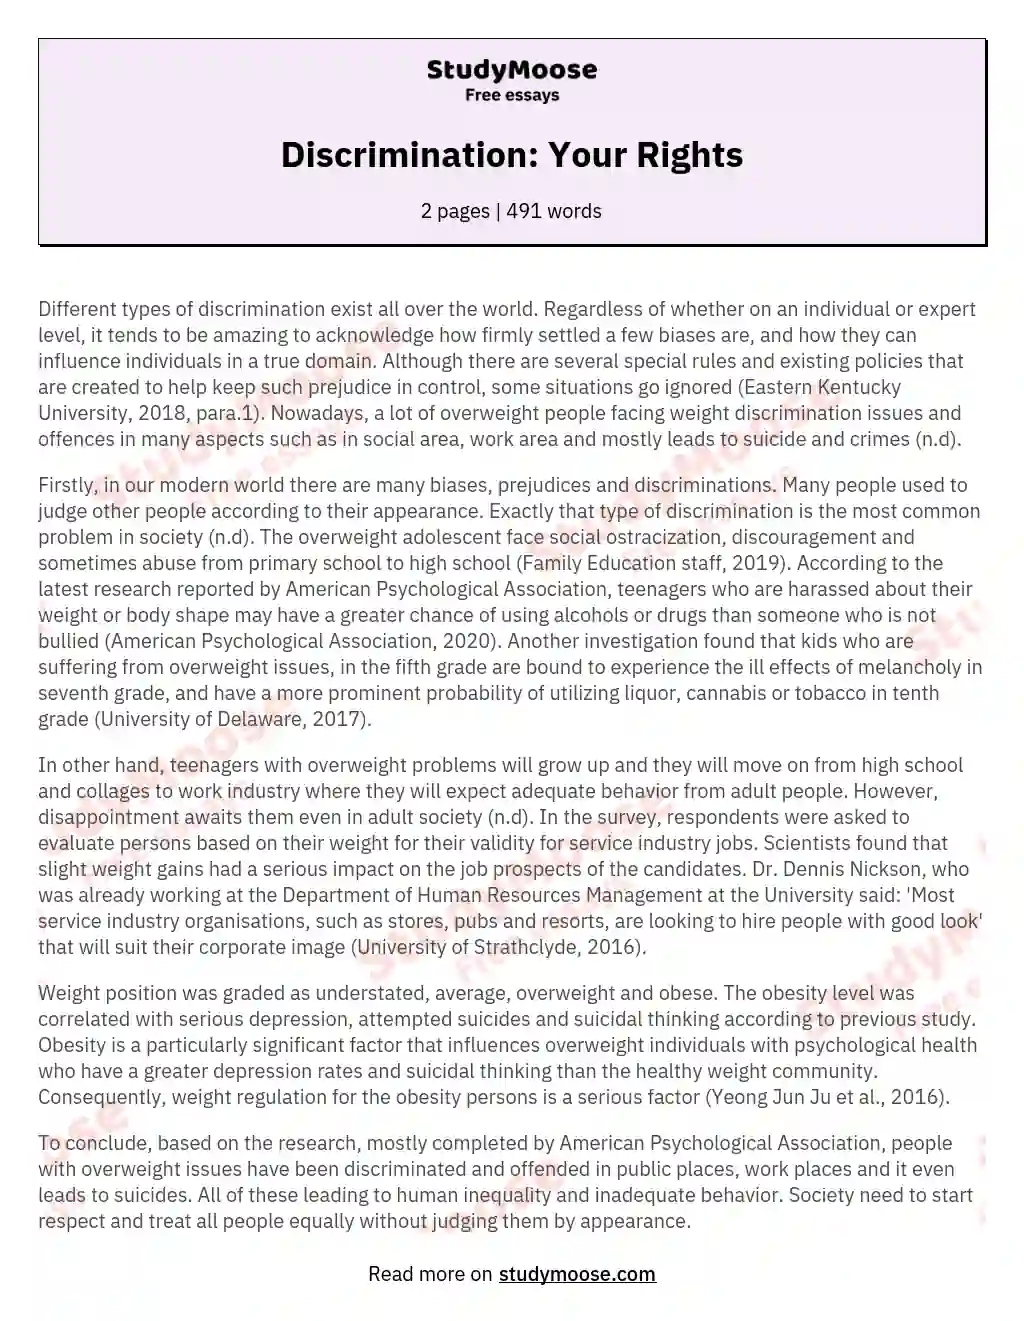 Discrimination: Your Rights essay